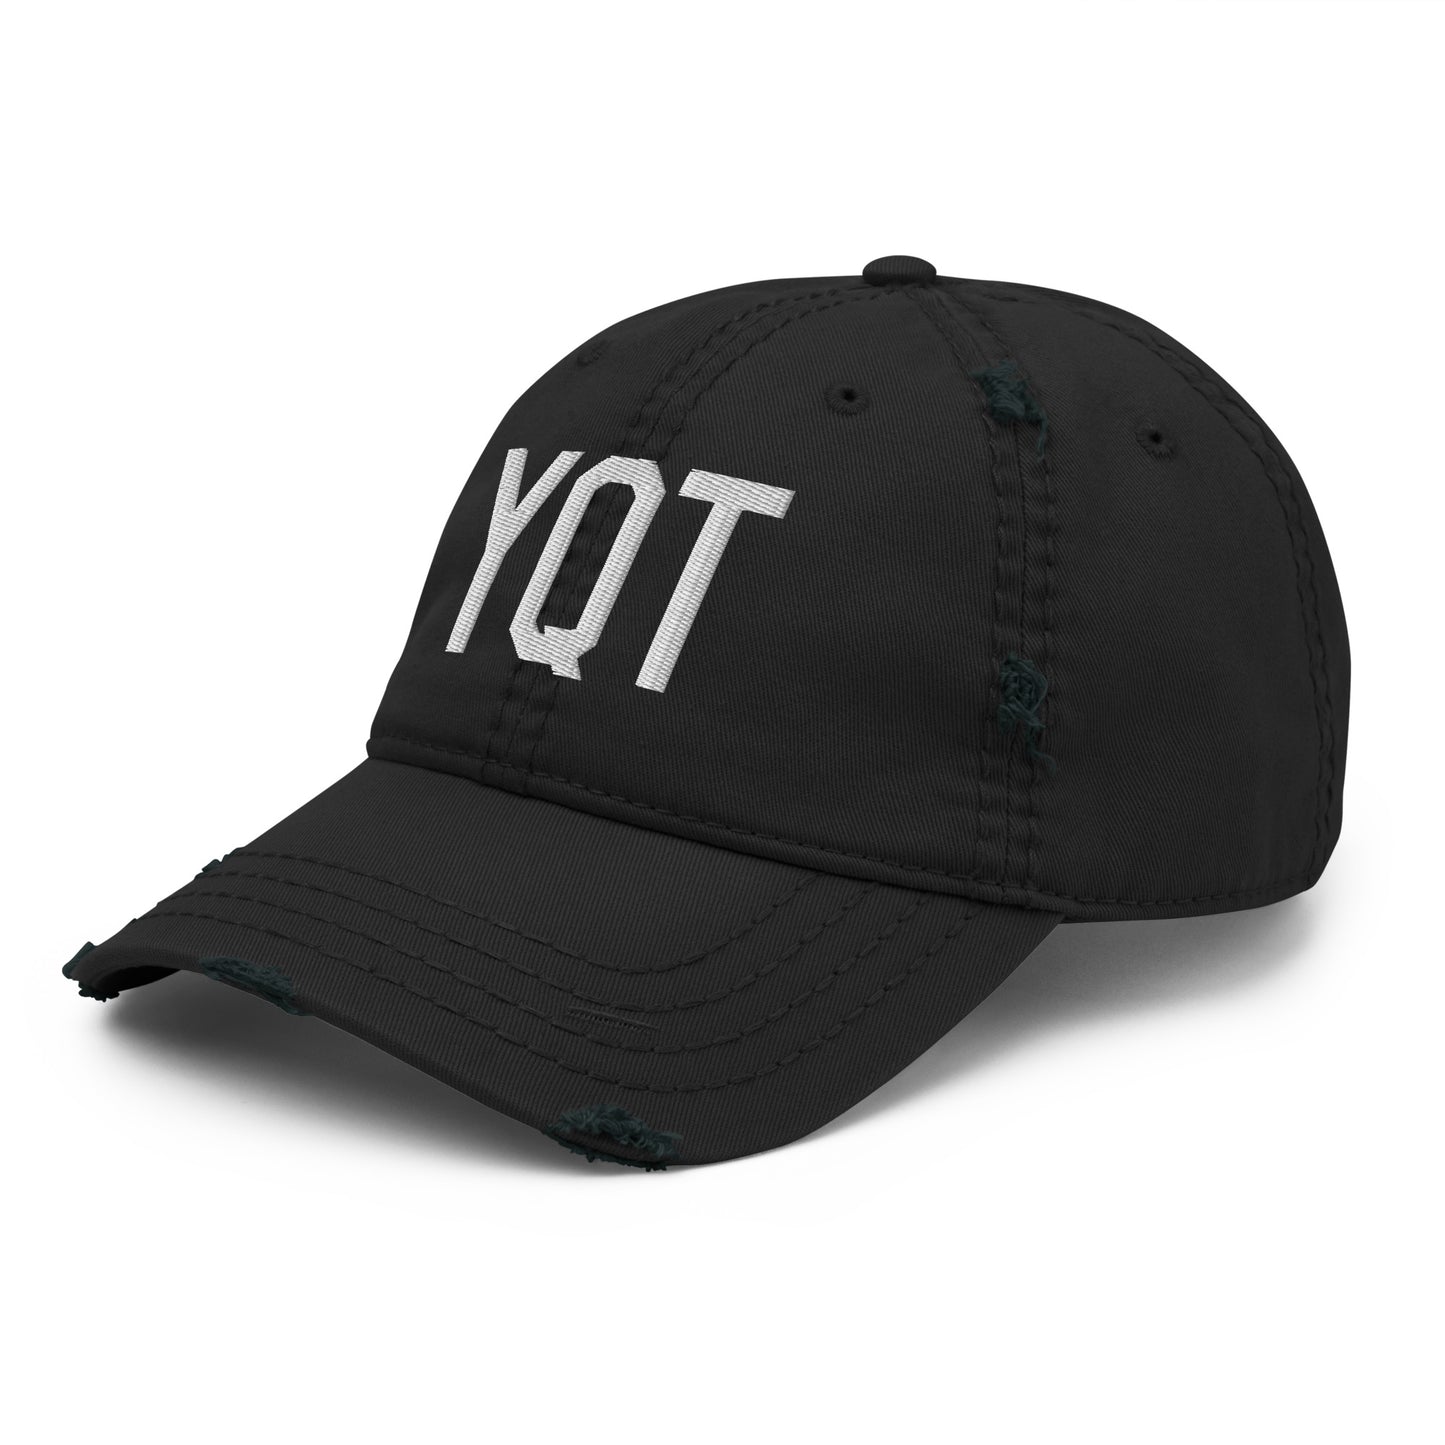 Airport Code Distressed Hat - White • YQT Thunder Bay • YHM Designs - Image 11